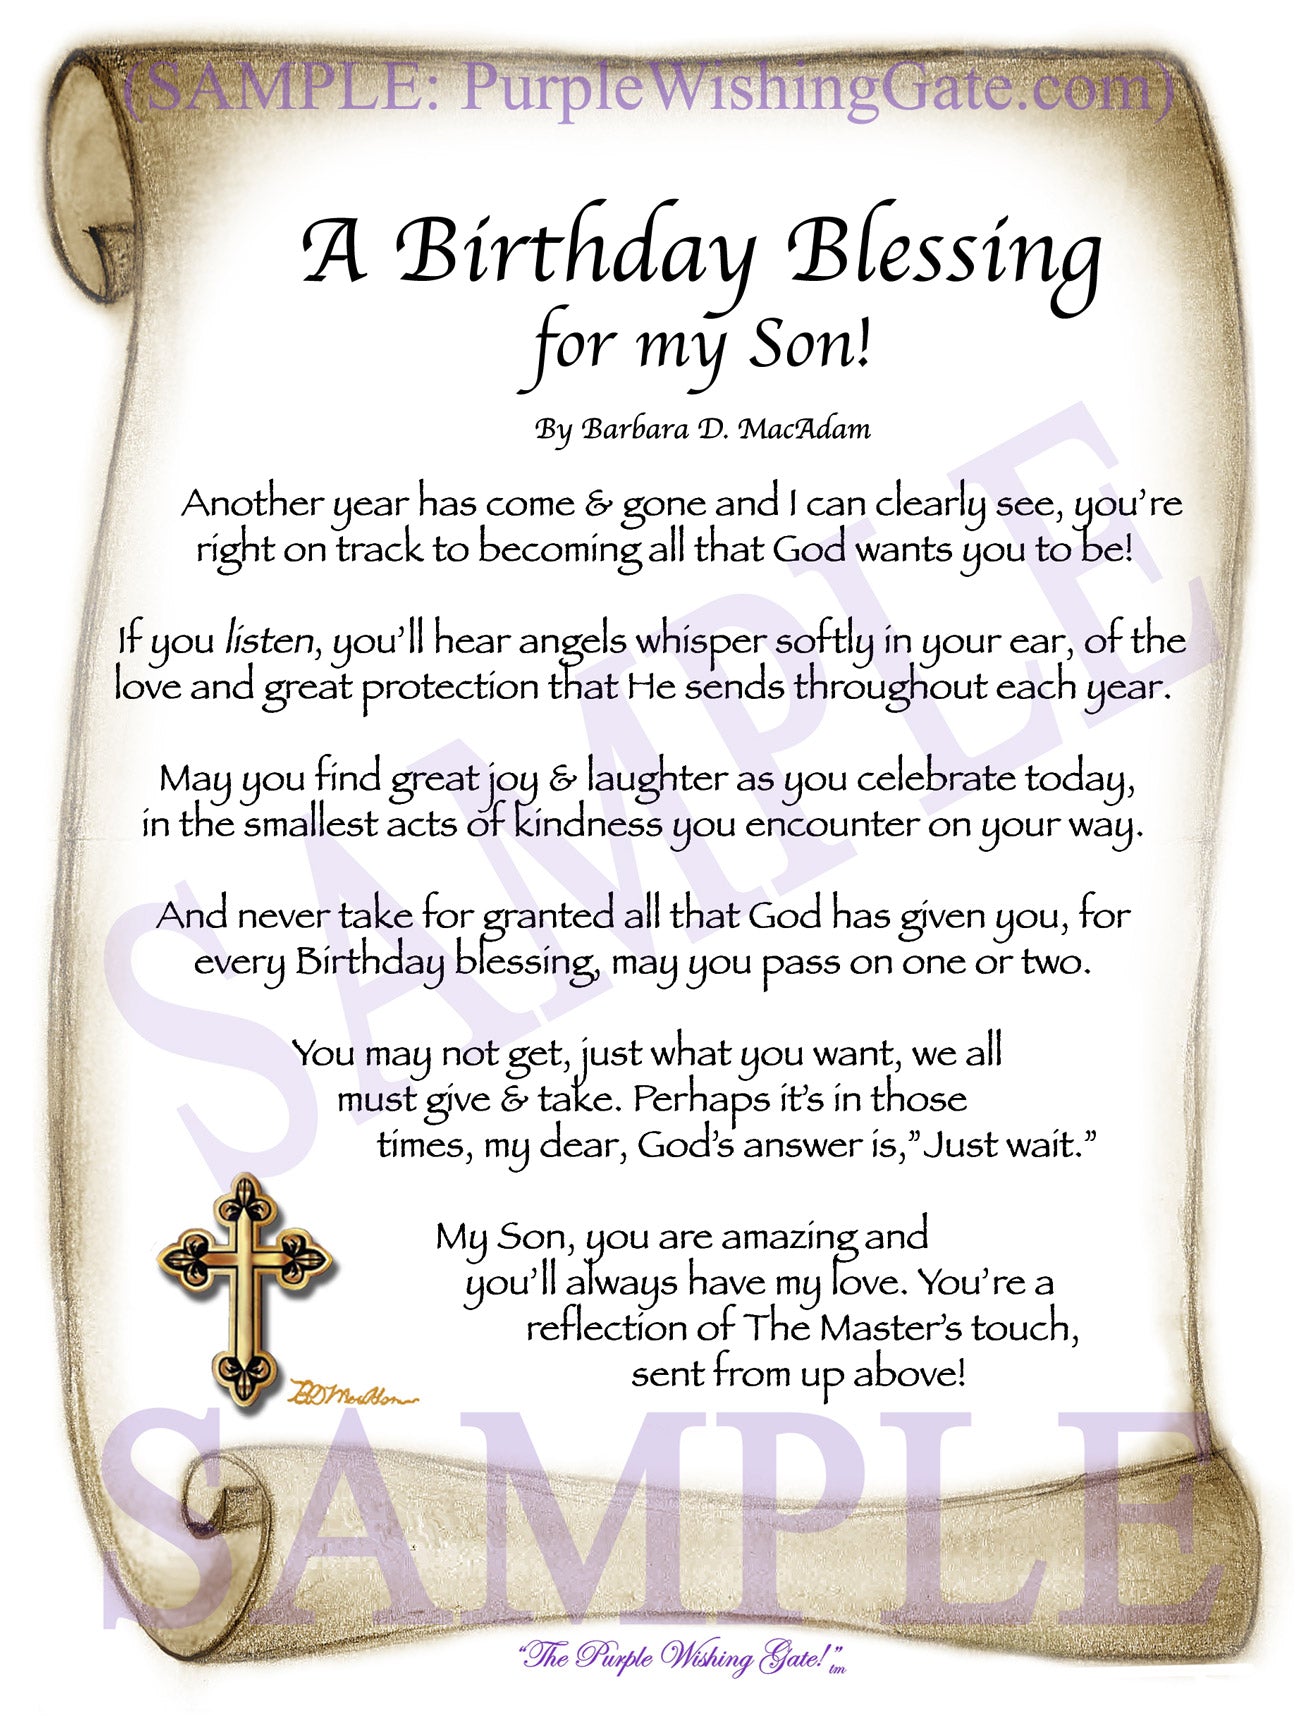 A SON'S BIRTHDAY BLESSING: Framed, Personalized Gifts